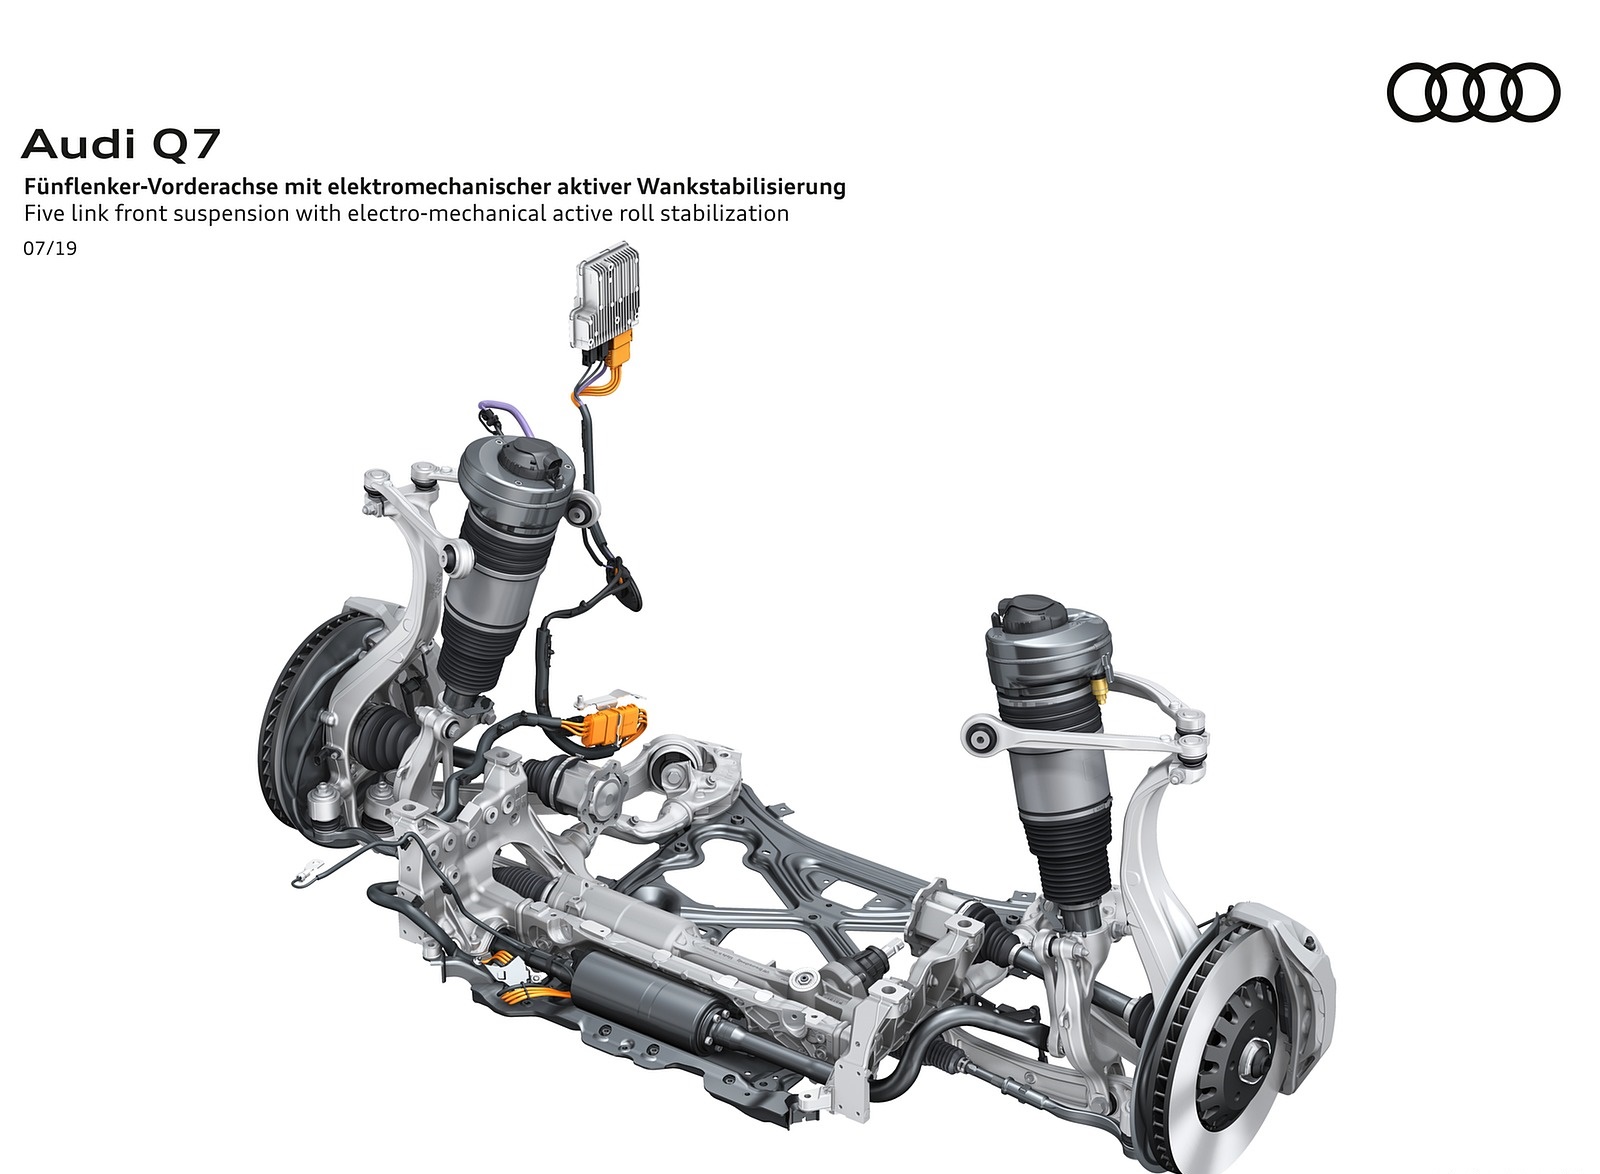 2020 Audi Q7 Five link front suspension with electro-mechanical active roll stabilization Wallpapers #136 of 158